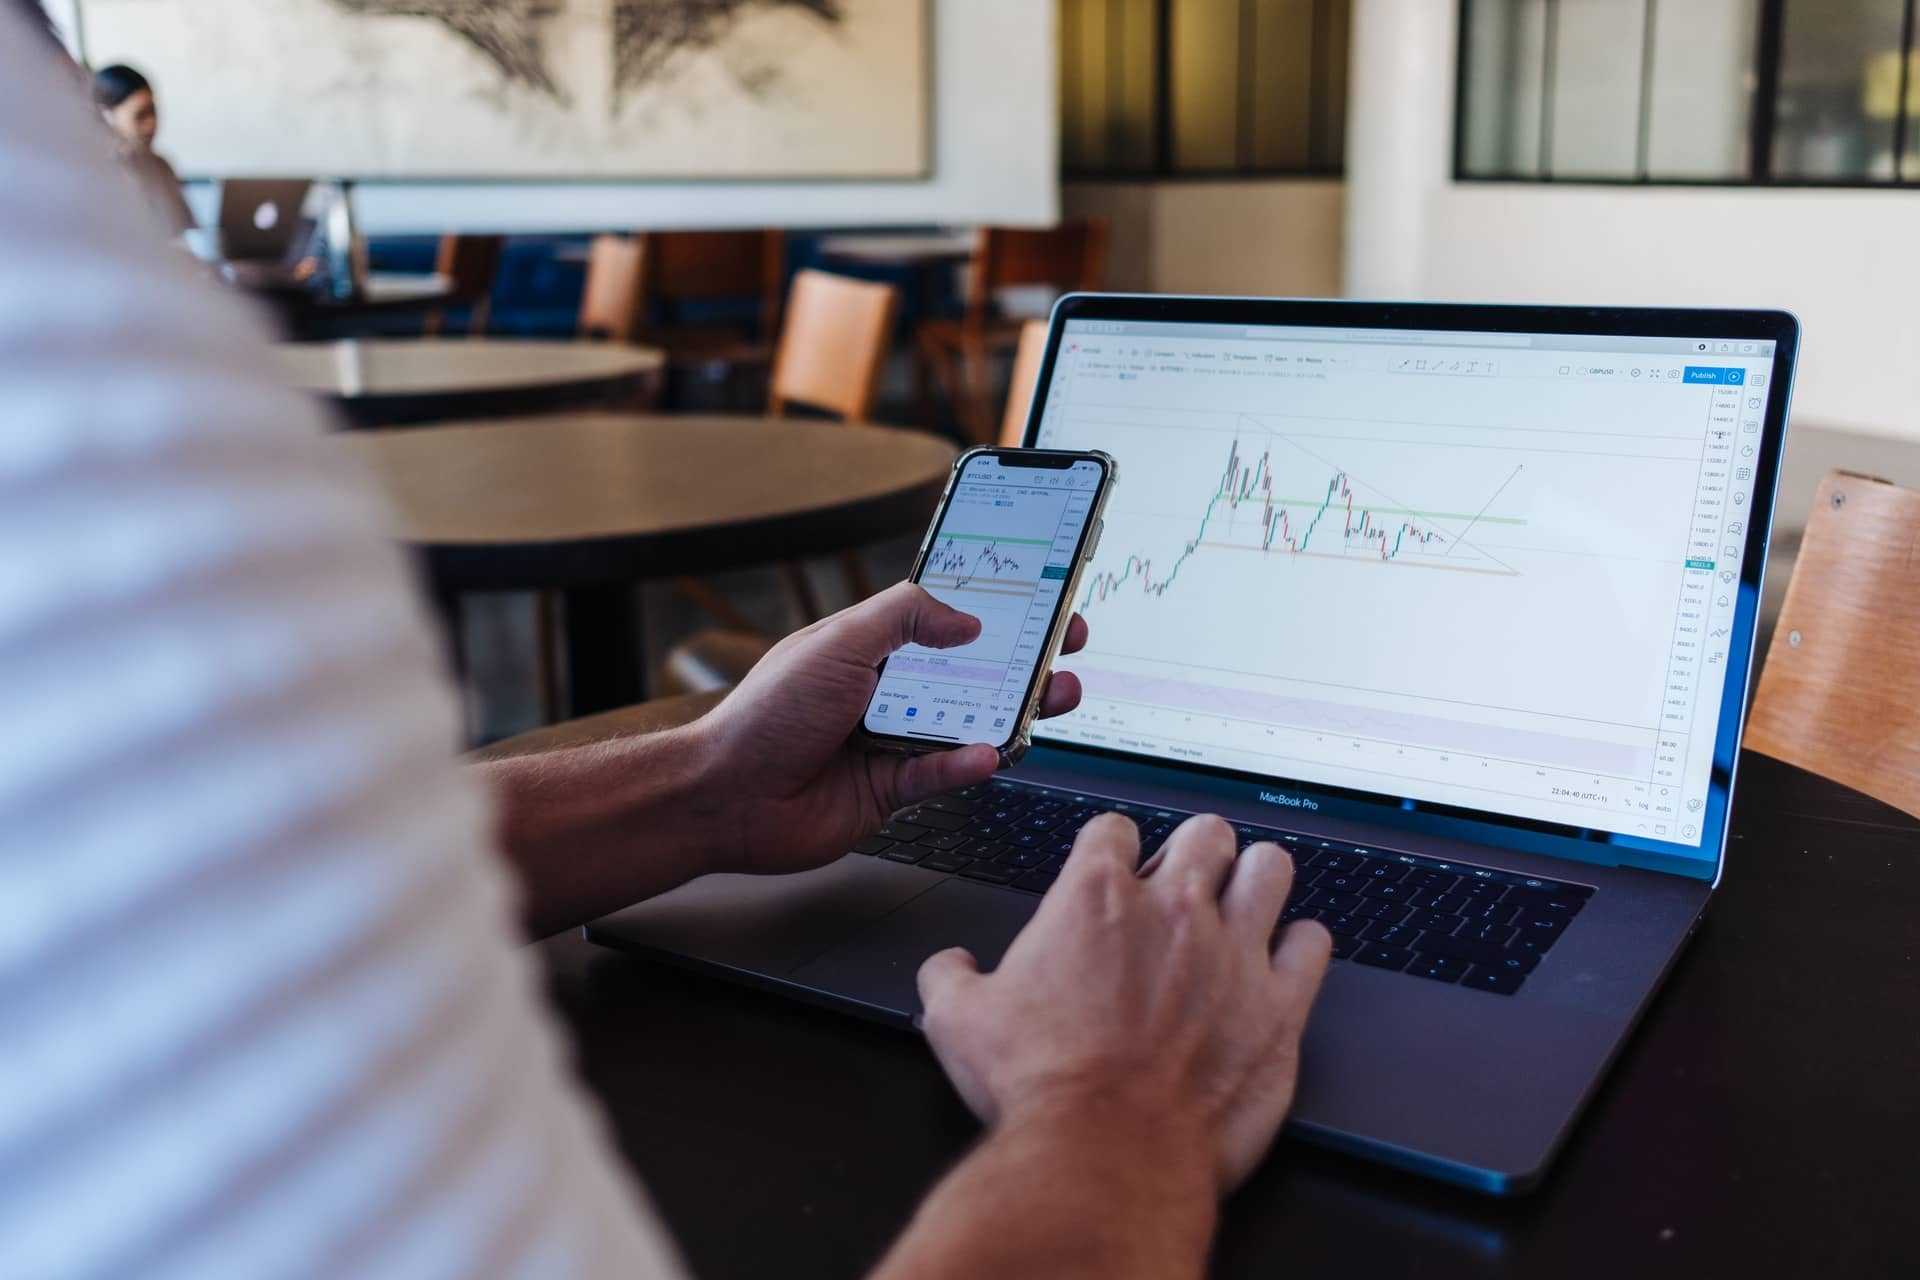 A man sitting at a desk looking at a stock trading chart on his phone and laptop